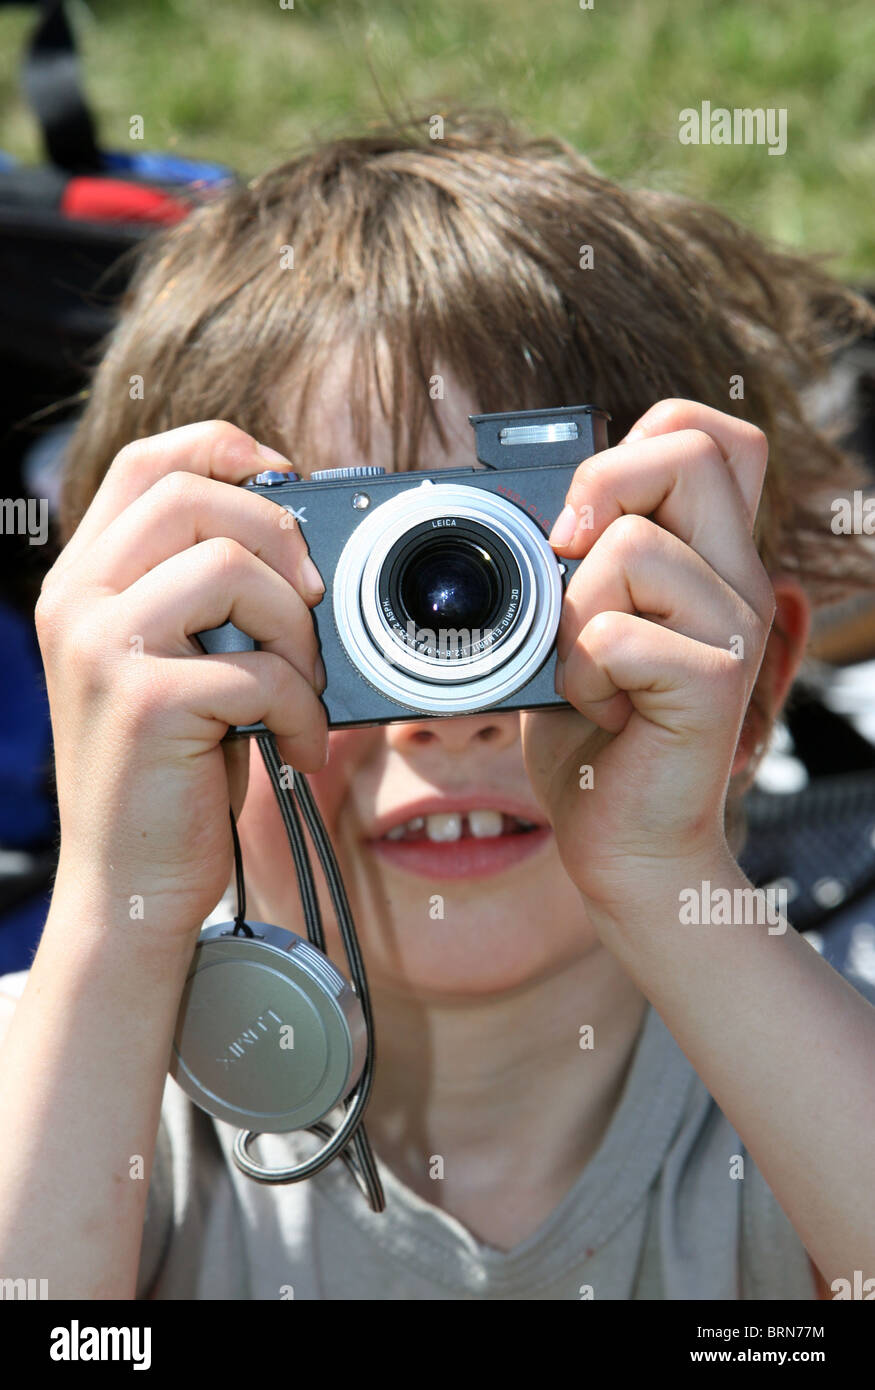 A boy taking a picture Stock Photo